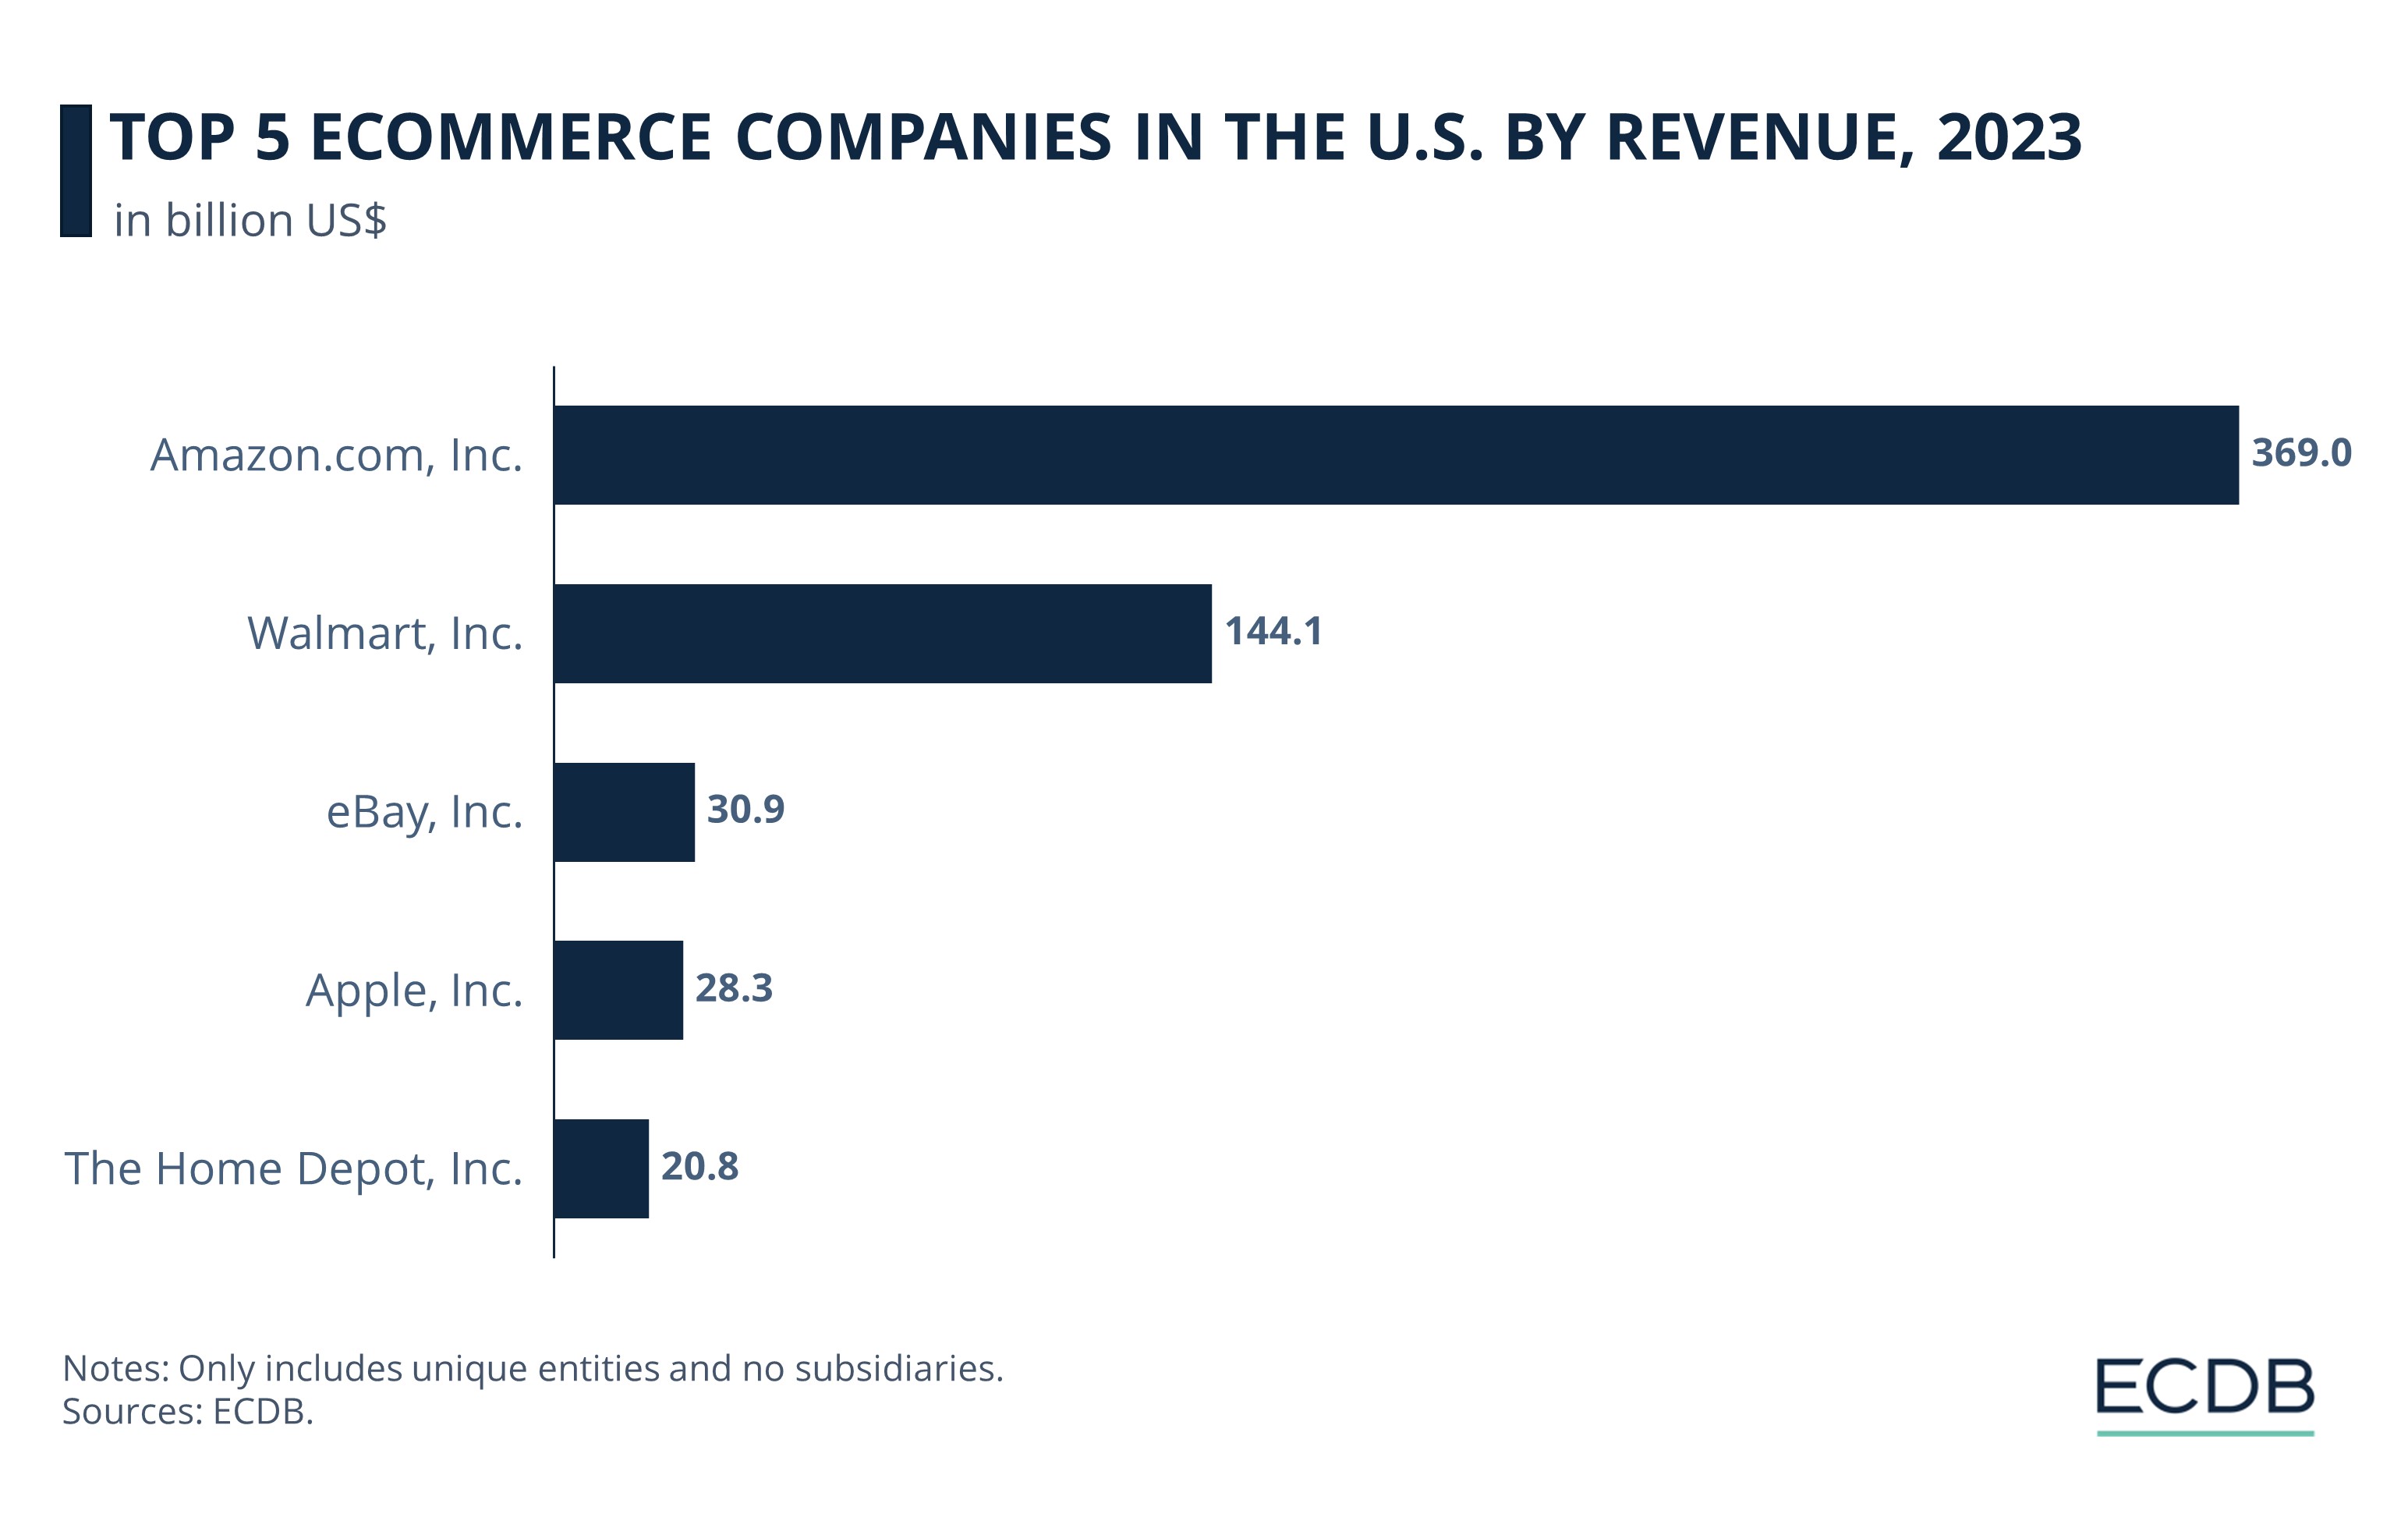 Top 5 Ecommerce Companies in the U.S. By Revenue, 2023